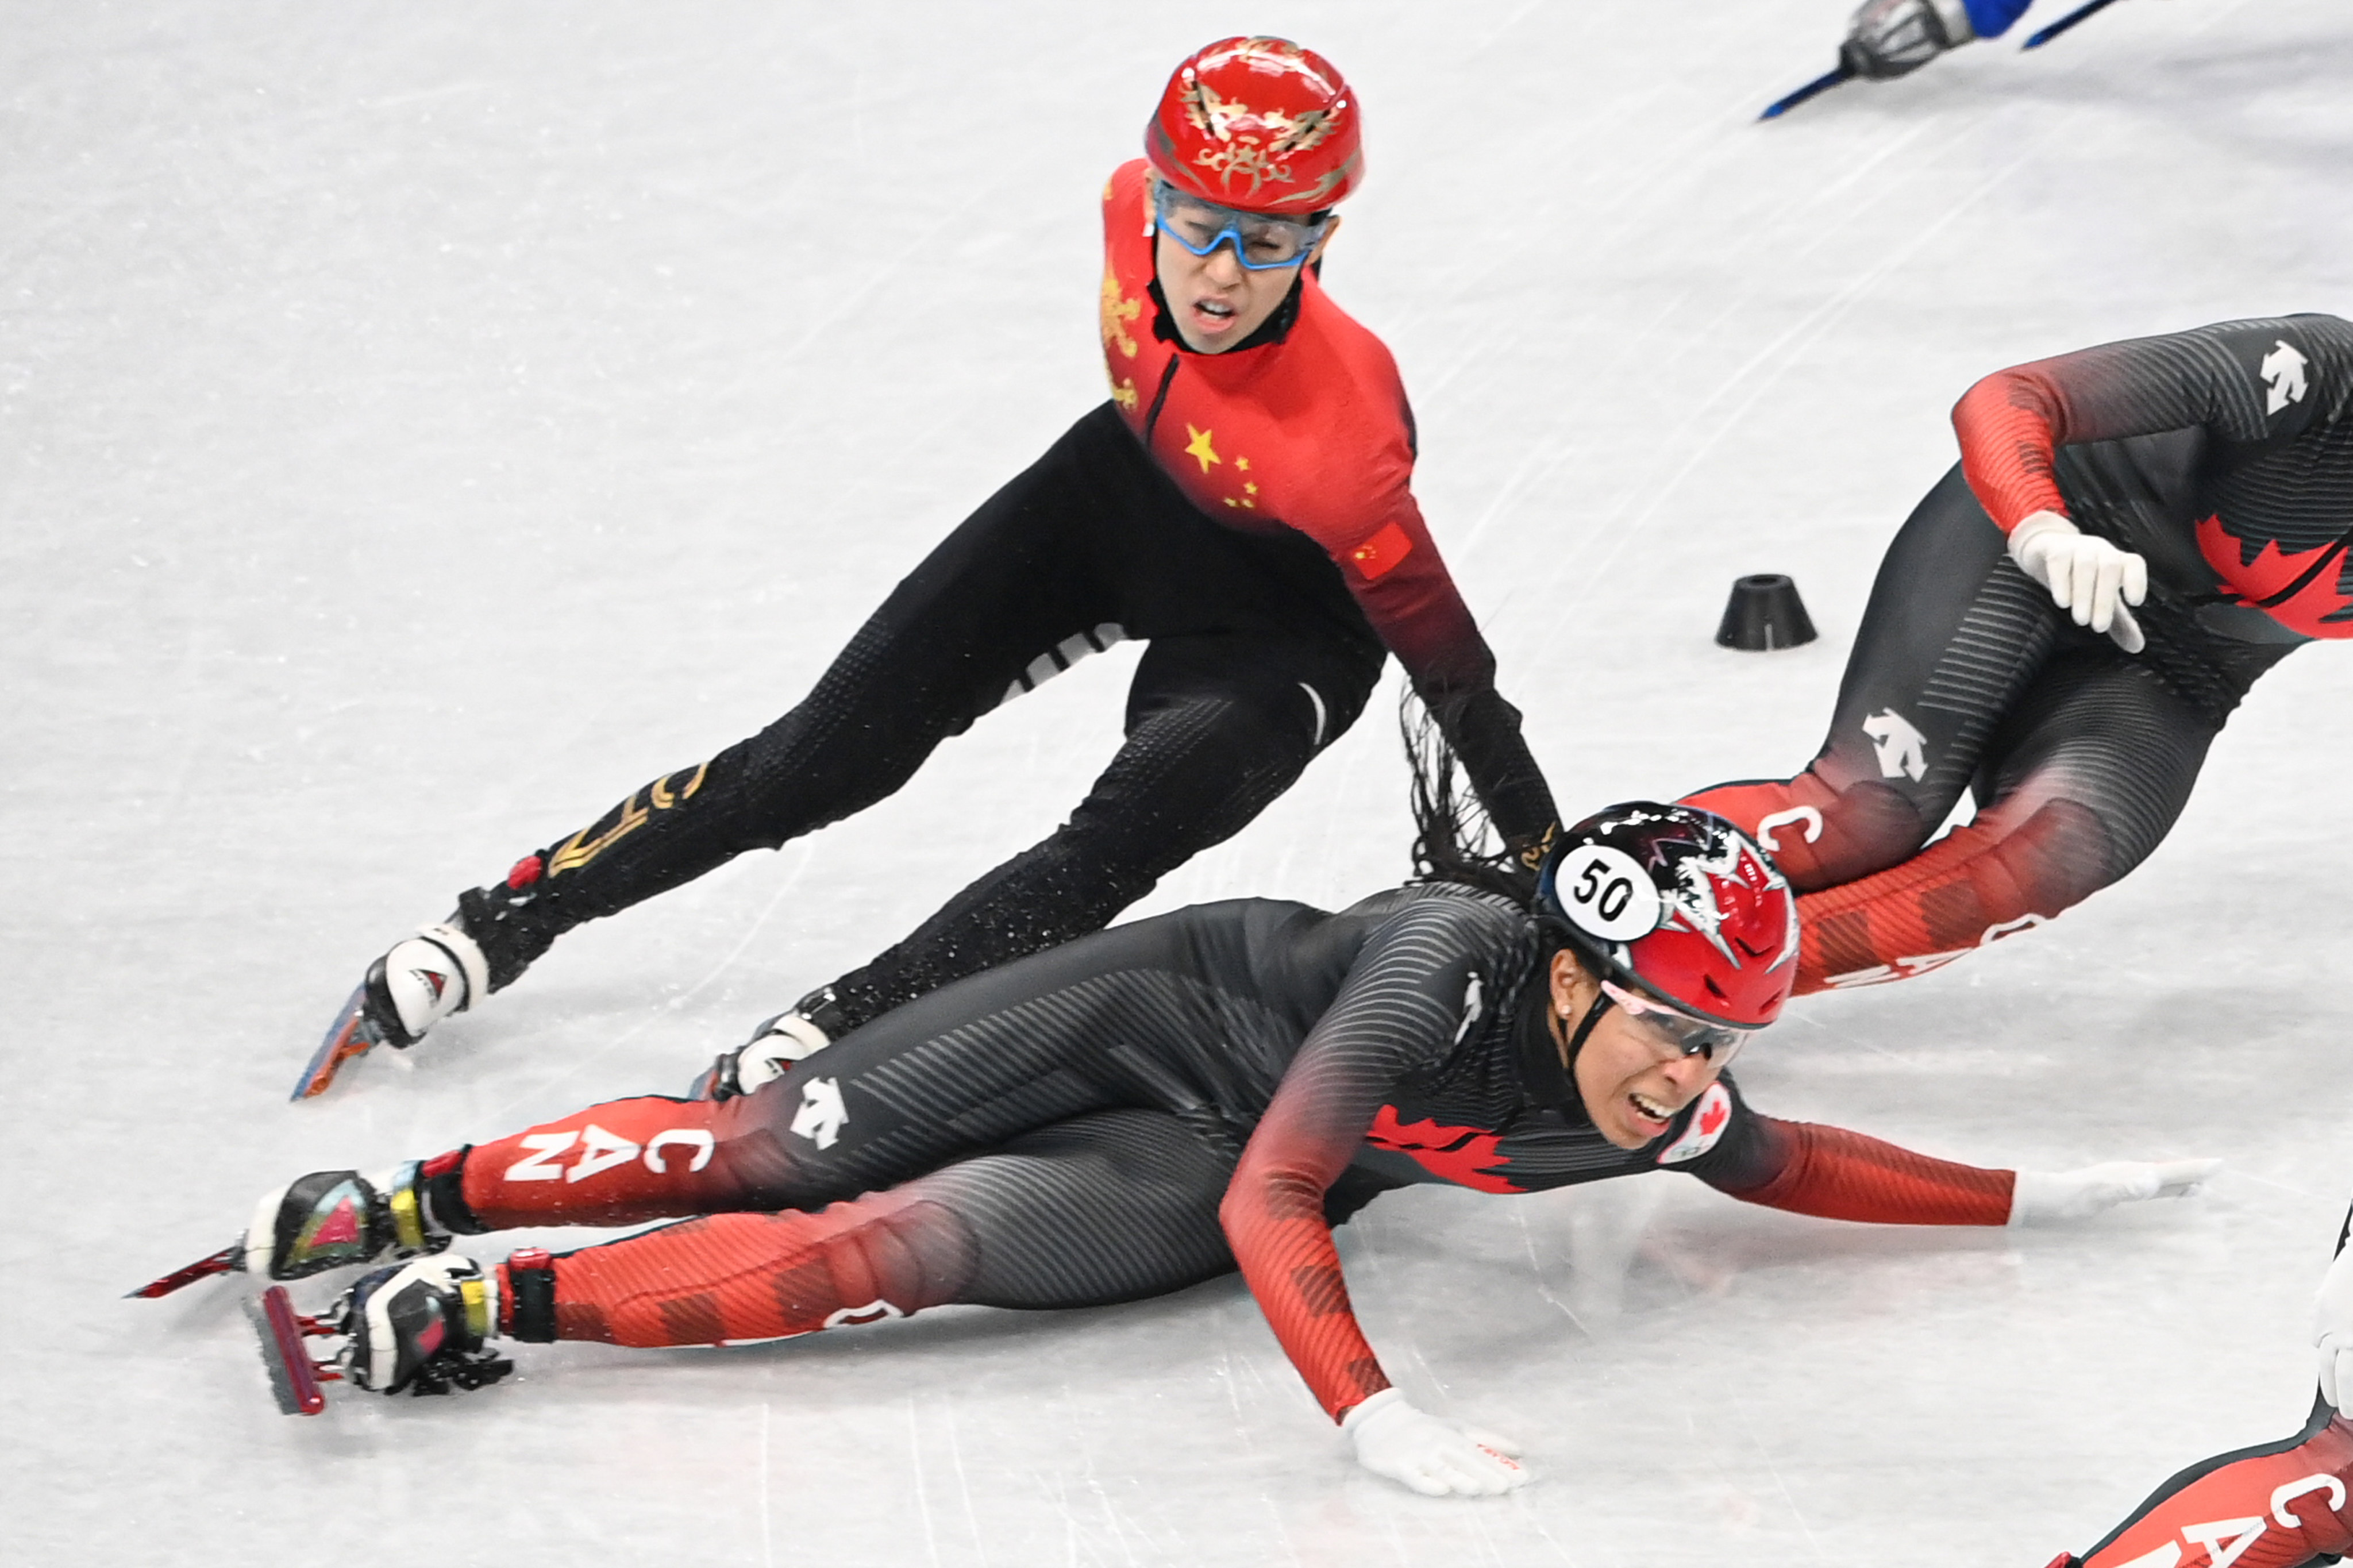 Winter Olympics fans accuse Chinese speed skater Fan Kexin of deliberate Mario Kart trick to trip opponent South China Morning Post